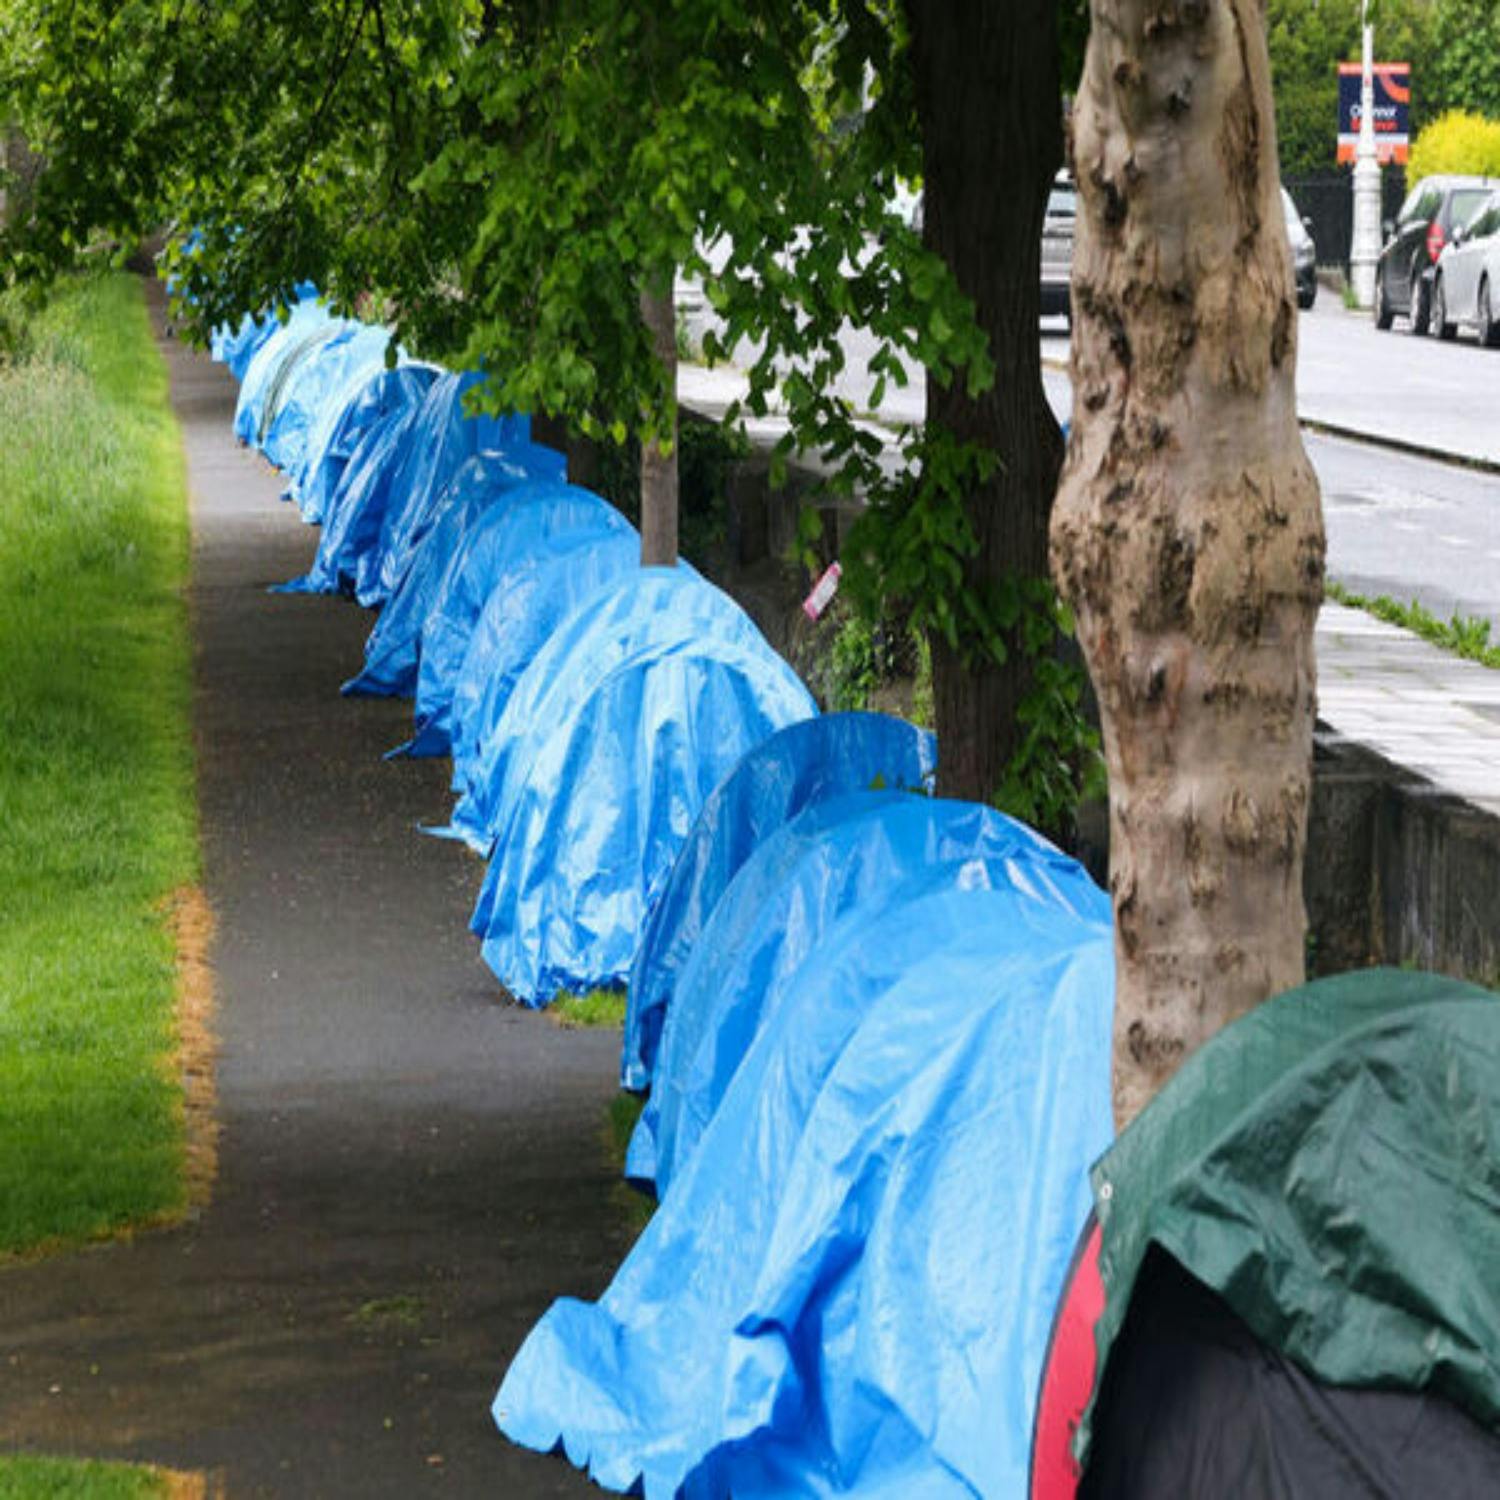 What should be done about the tents in Dublin?